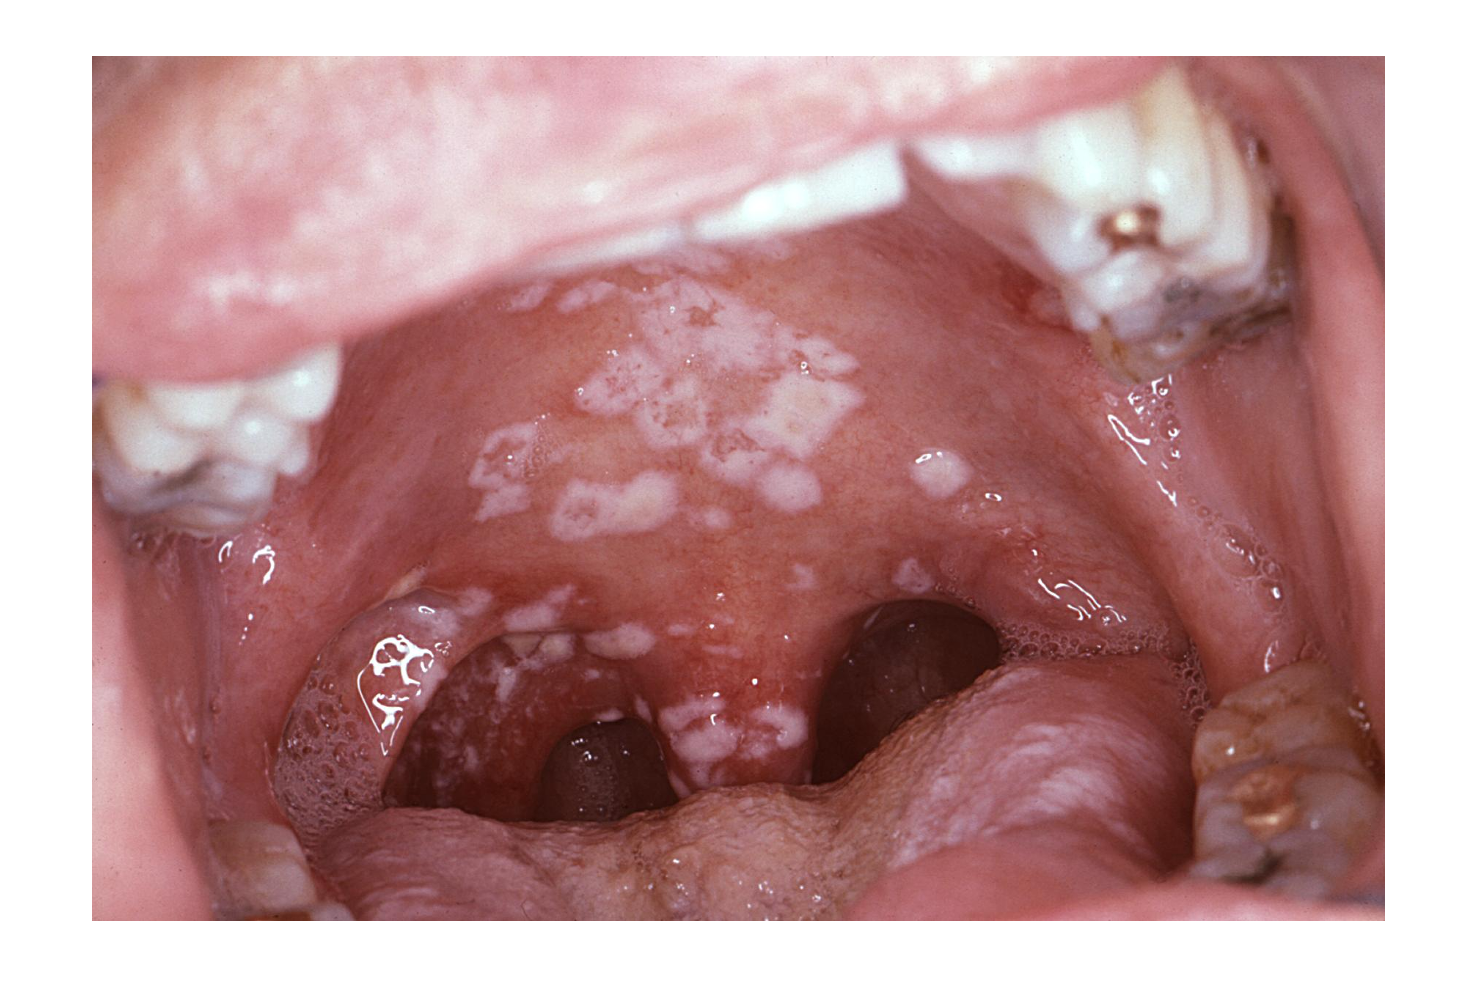 Oral pseudomembranous candidiasis infection.